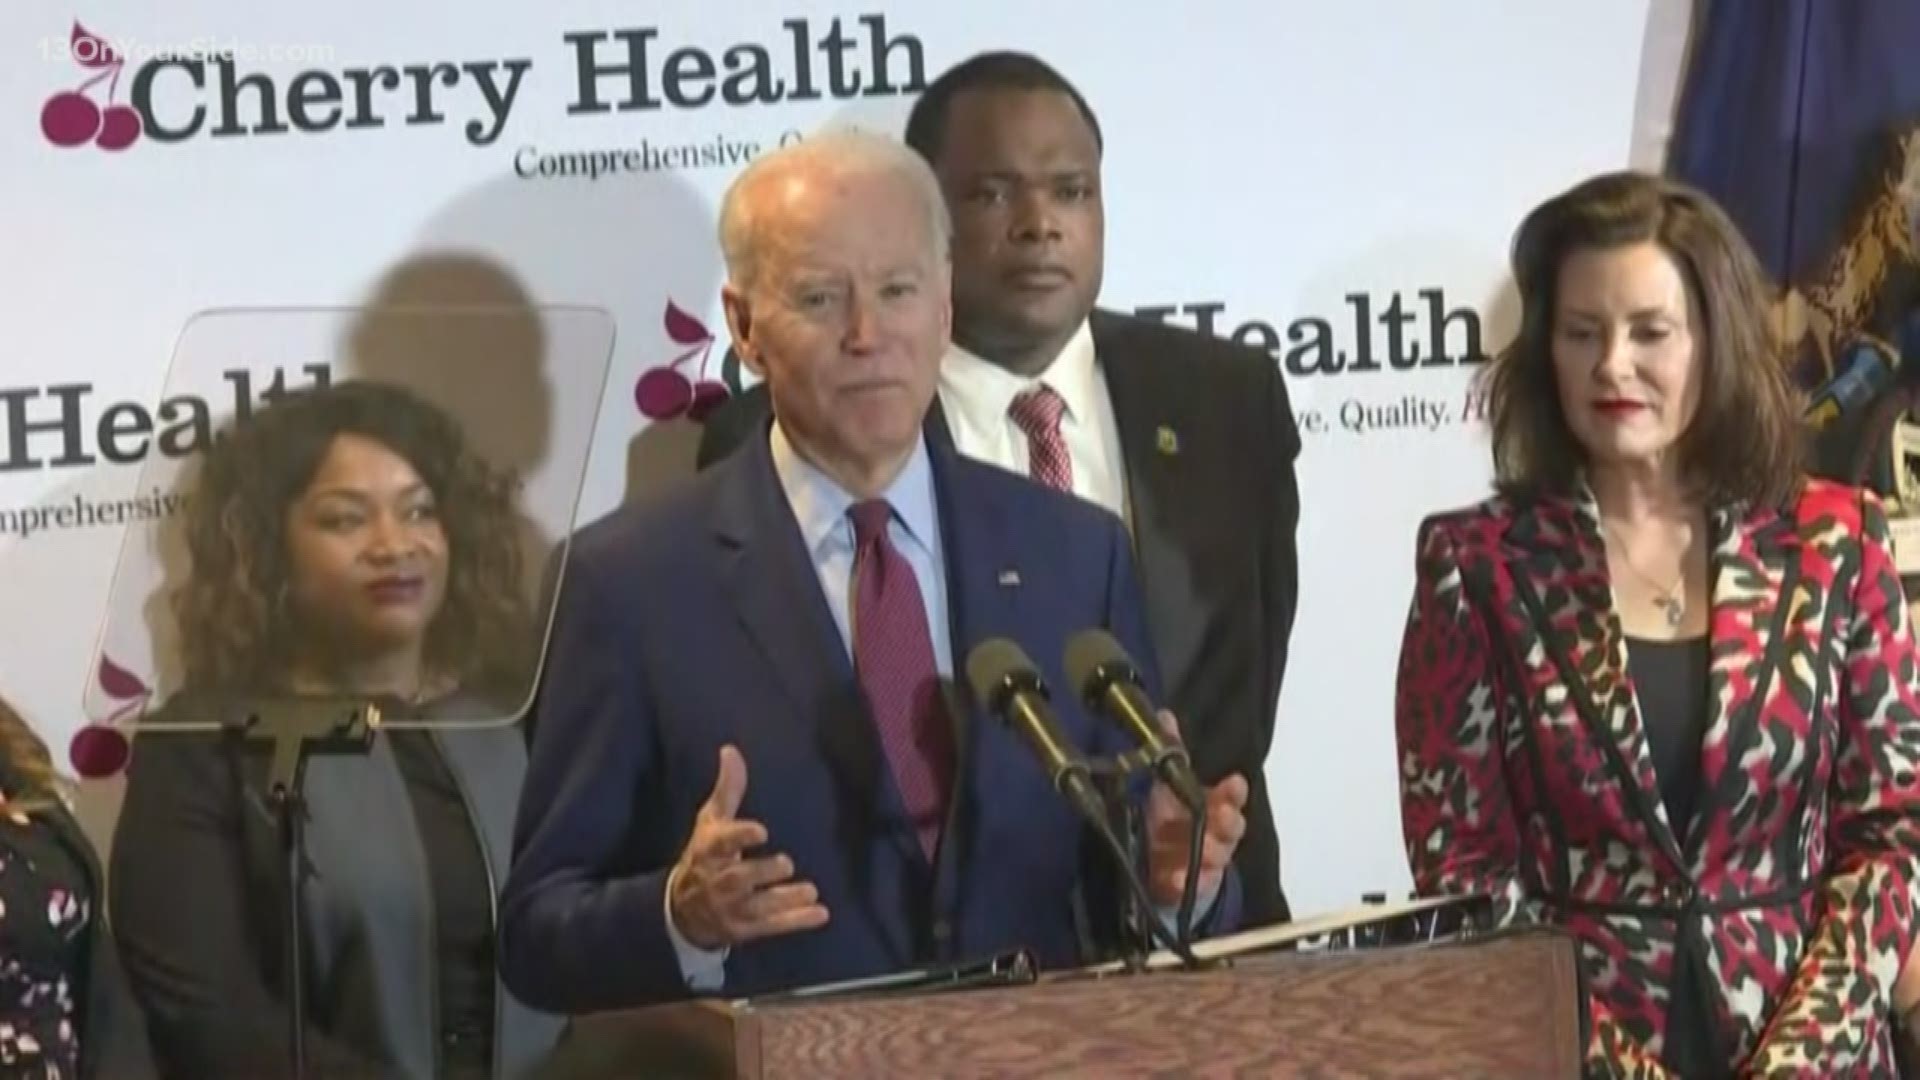 Joe Biden was at Cherry Health Monday morning pushing healthcare at a campaign event ahead of the Michigan democratic presidential primary Tuesday.